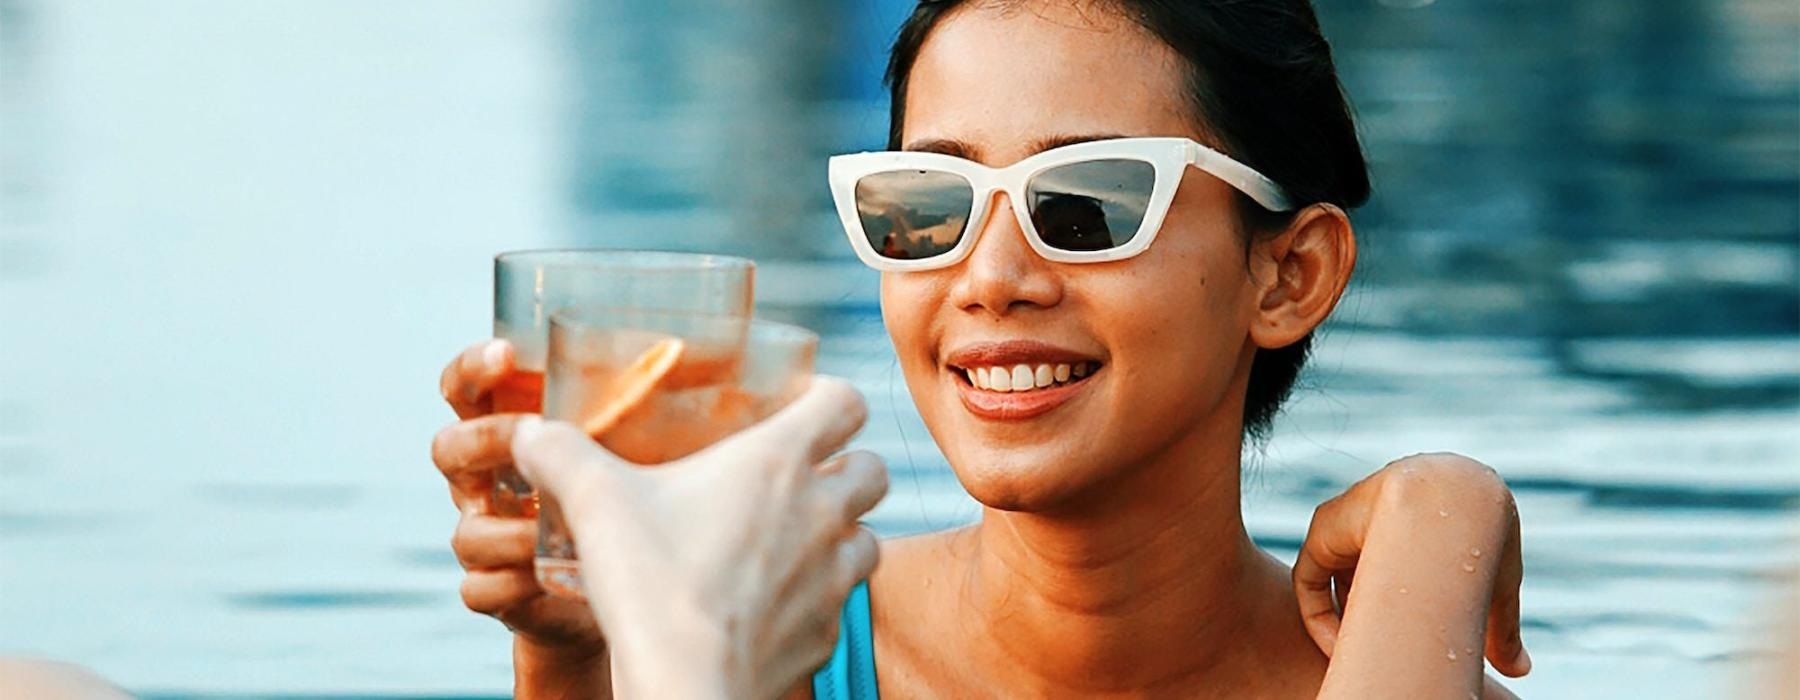 a woman in a pool holding a drink and a glass